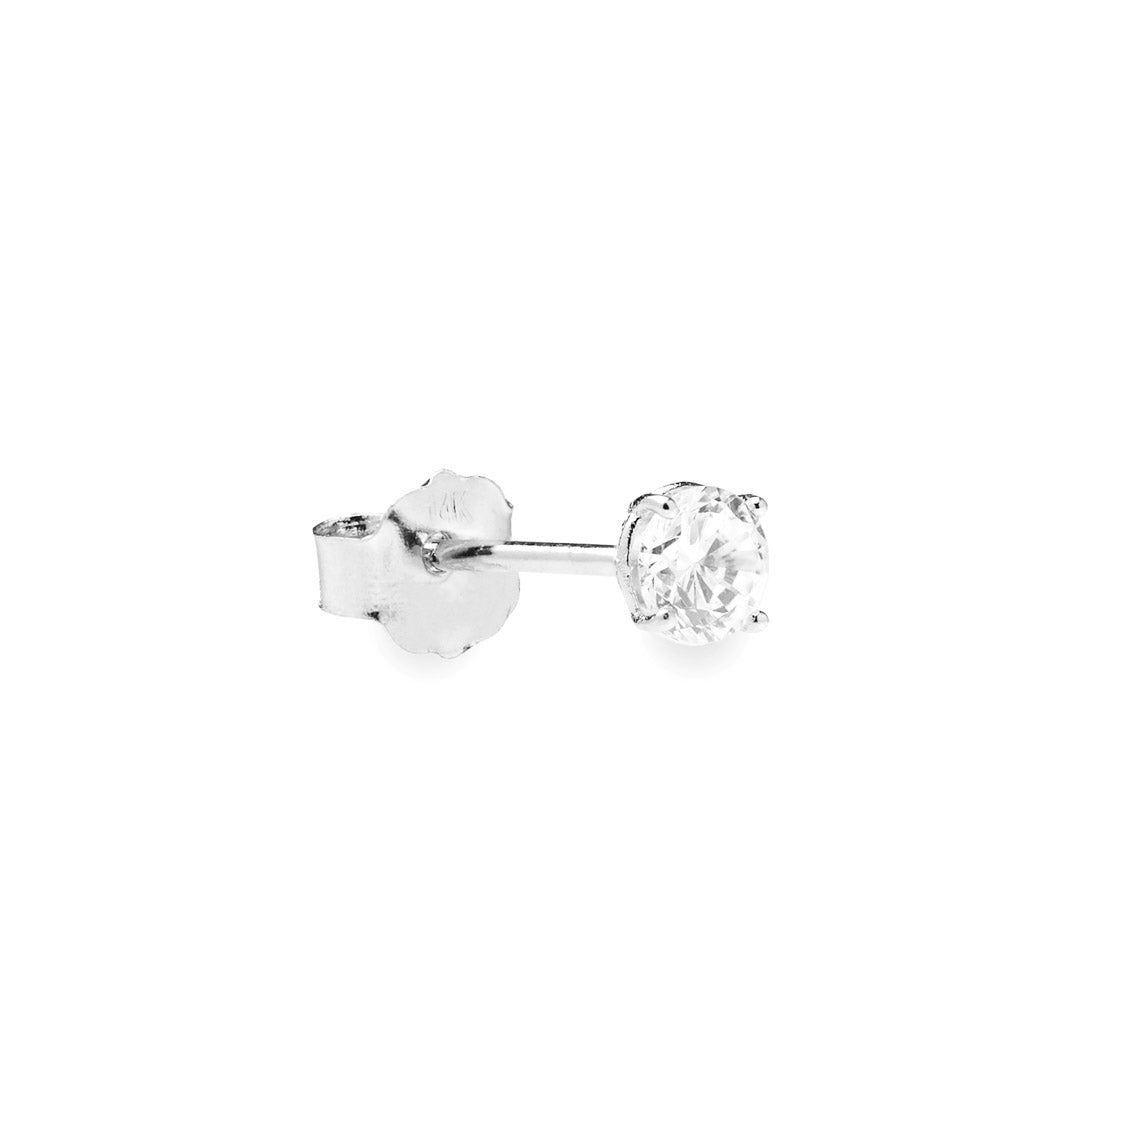 Brilliante medium 14k solid white gold single stud earring with solitaire stone - Helix & Conch